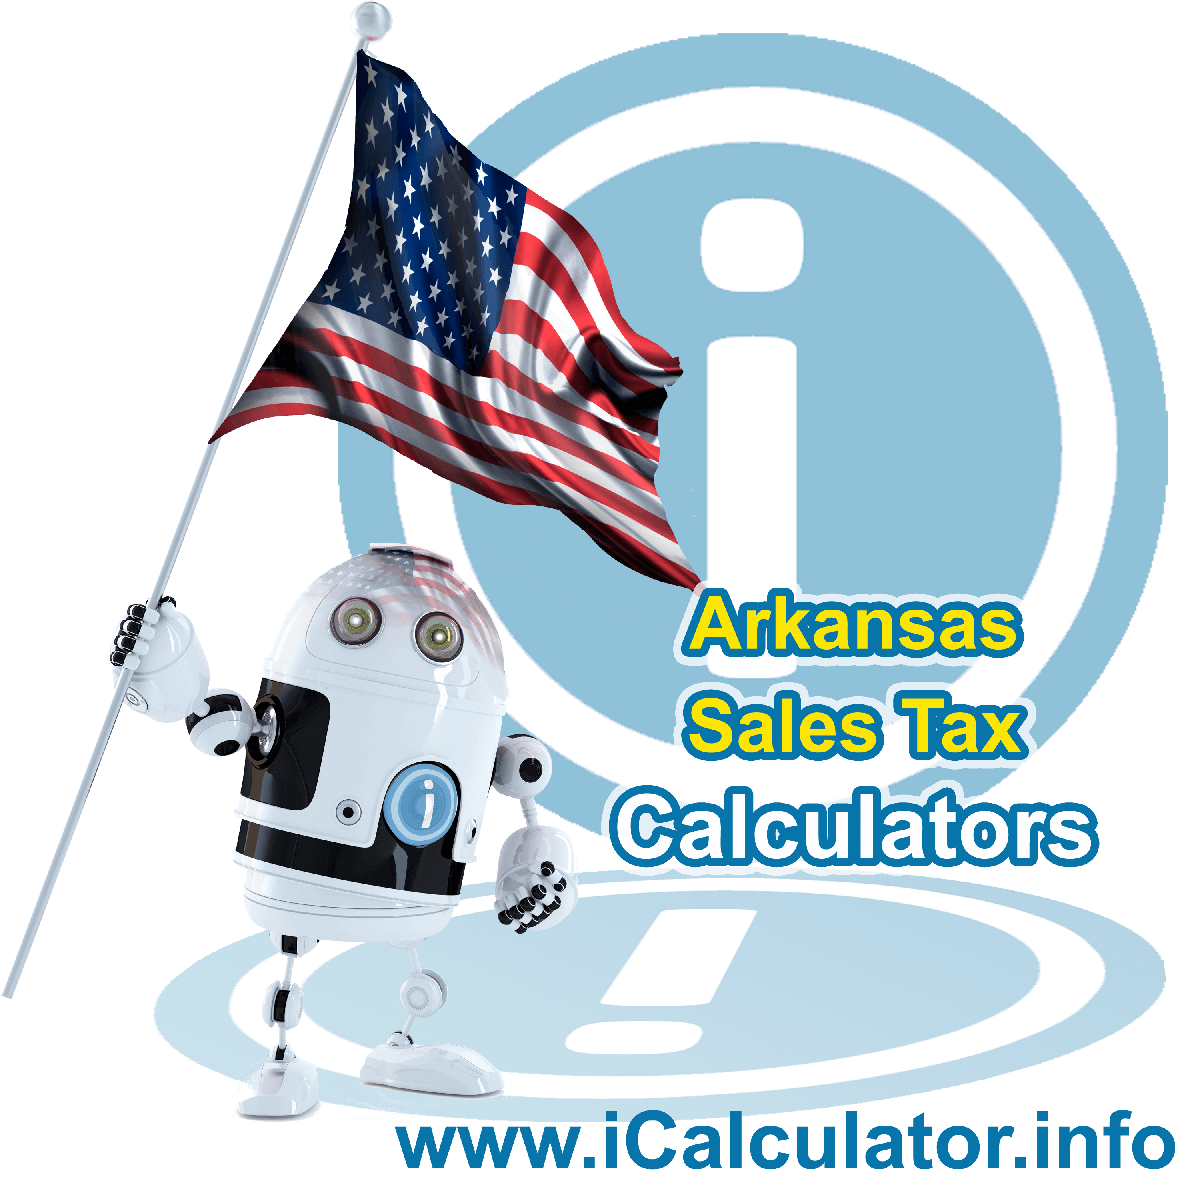 Searcy County Sales Rates: This image illustrates a calculator robot calculating Searcy County sales tax manually using the Searcy County Sales Tax Formula. You can use this information to calculate Searcy County Sales Tax manually or use the Searcy County Sales Tax Calculator to calculate sales tax online.